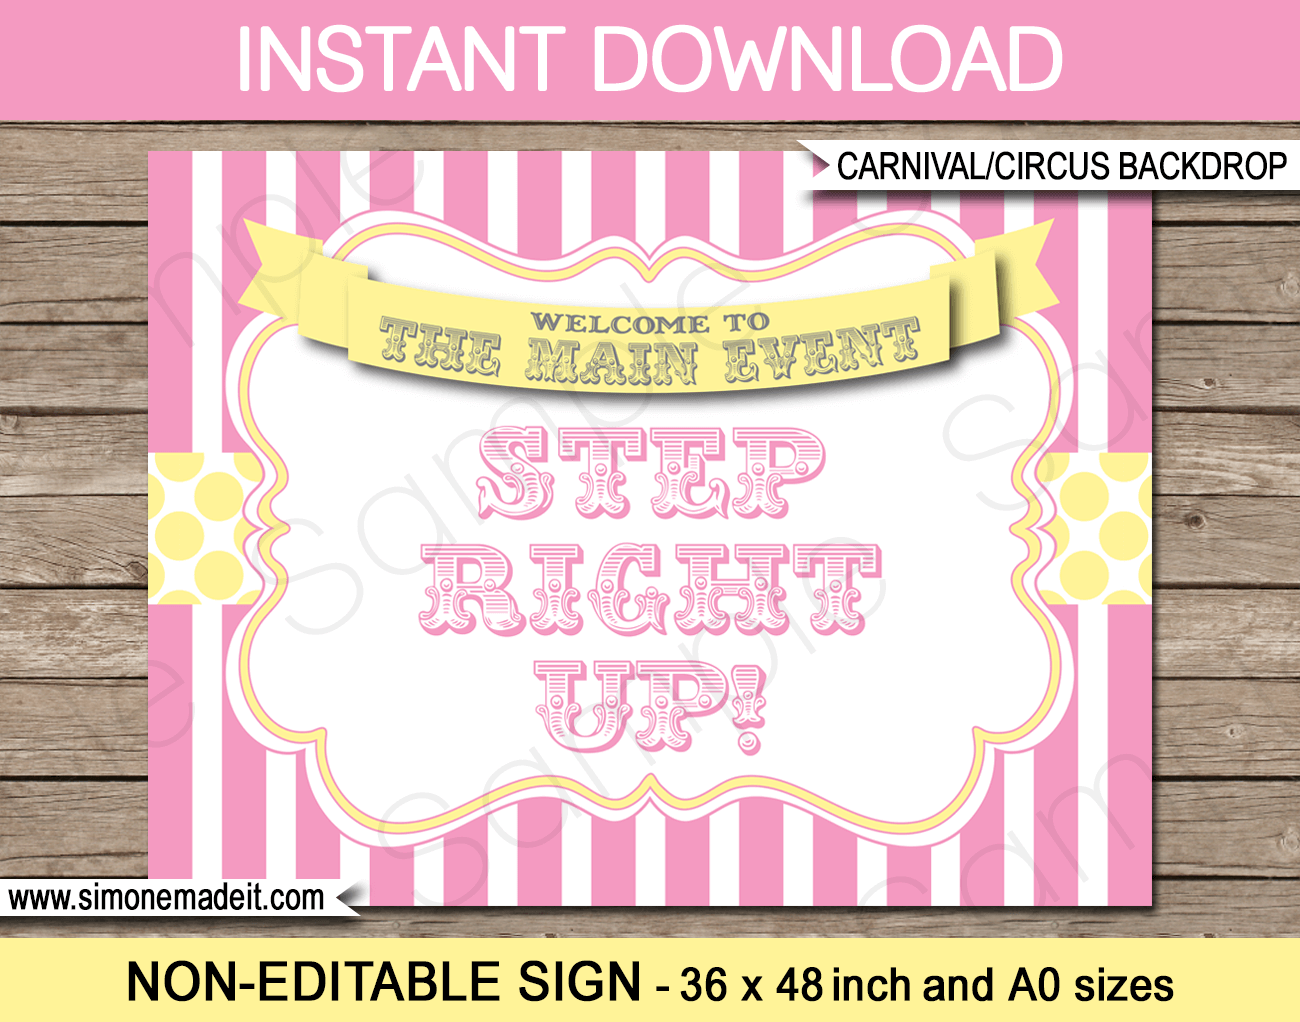 Printable Pink Carnival Backdrop | Step Right Up | Circus | Pink Yellow Party Decorations | DIY Template | INSTANT DOWNLOAD via simonemadeit.com